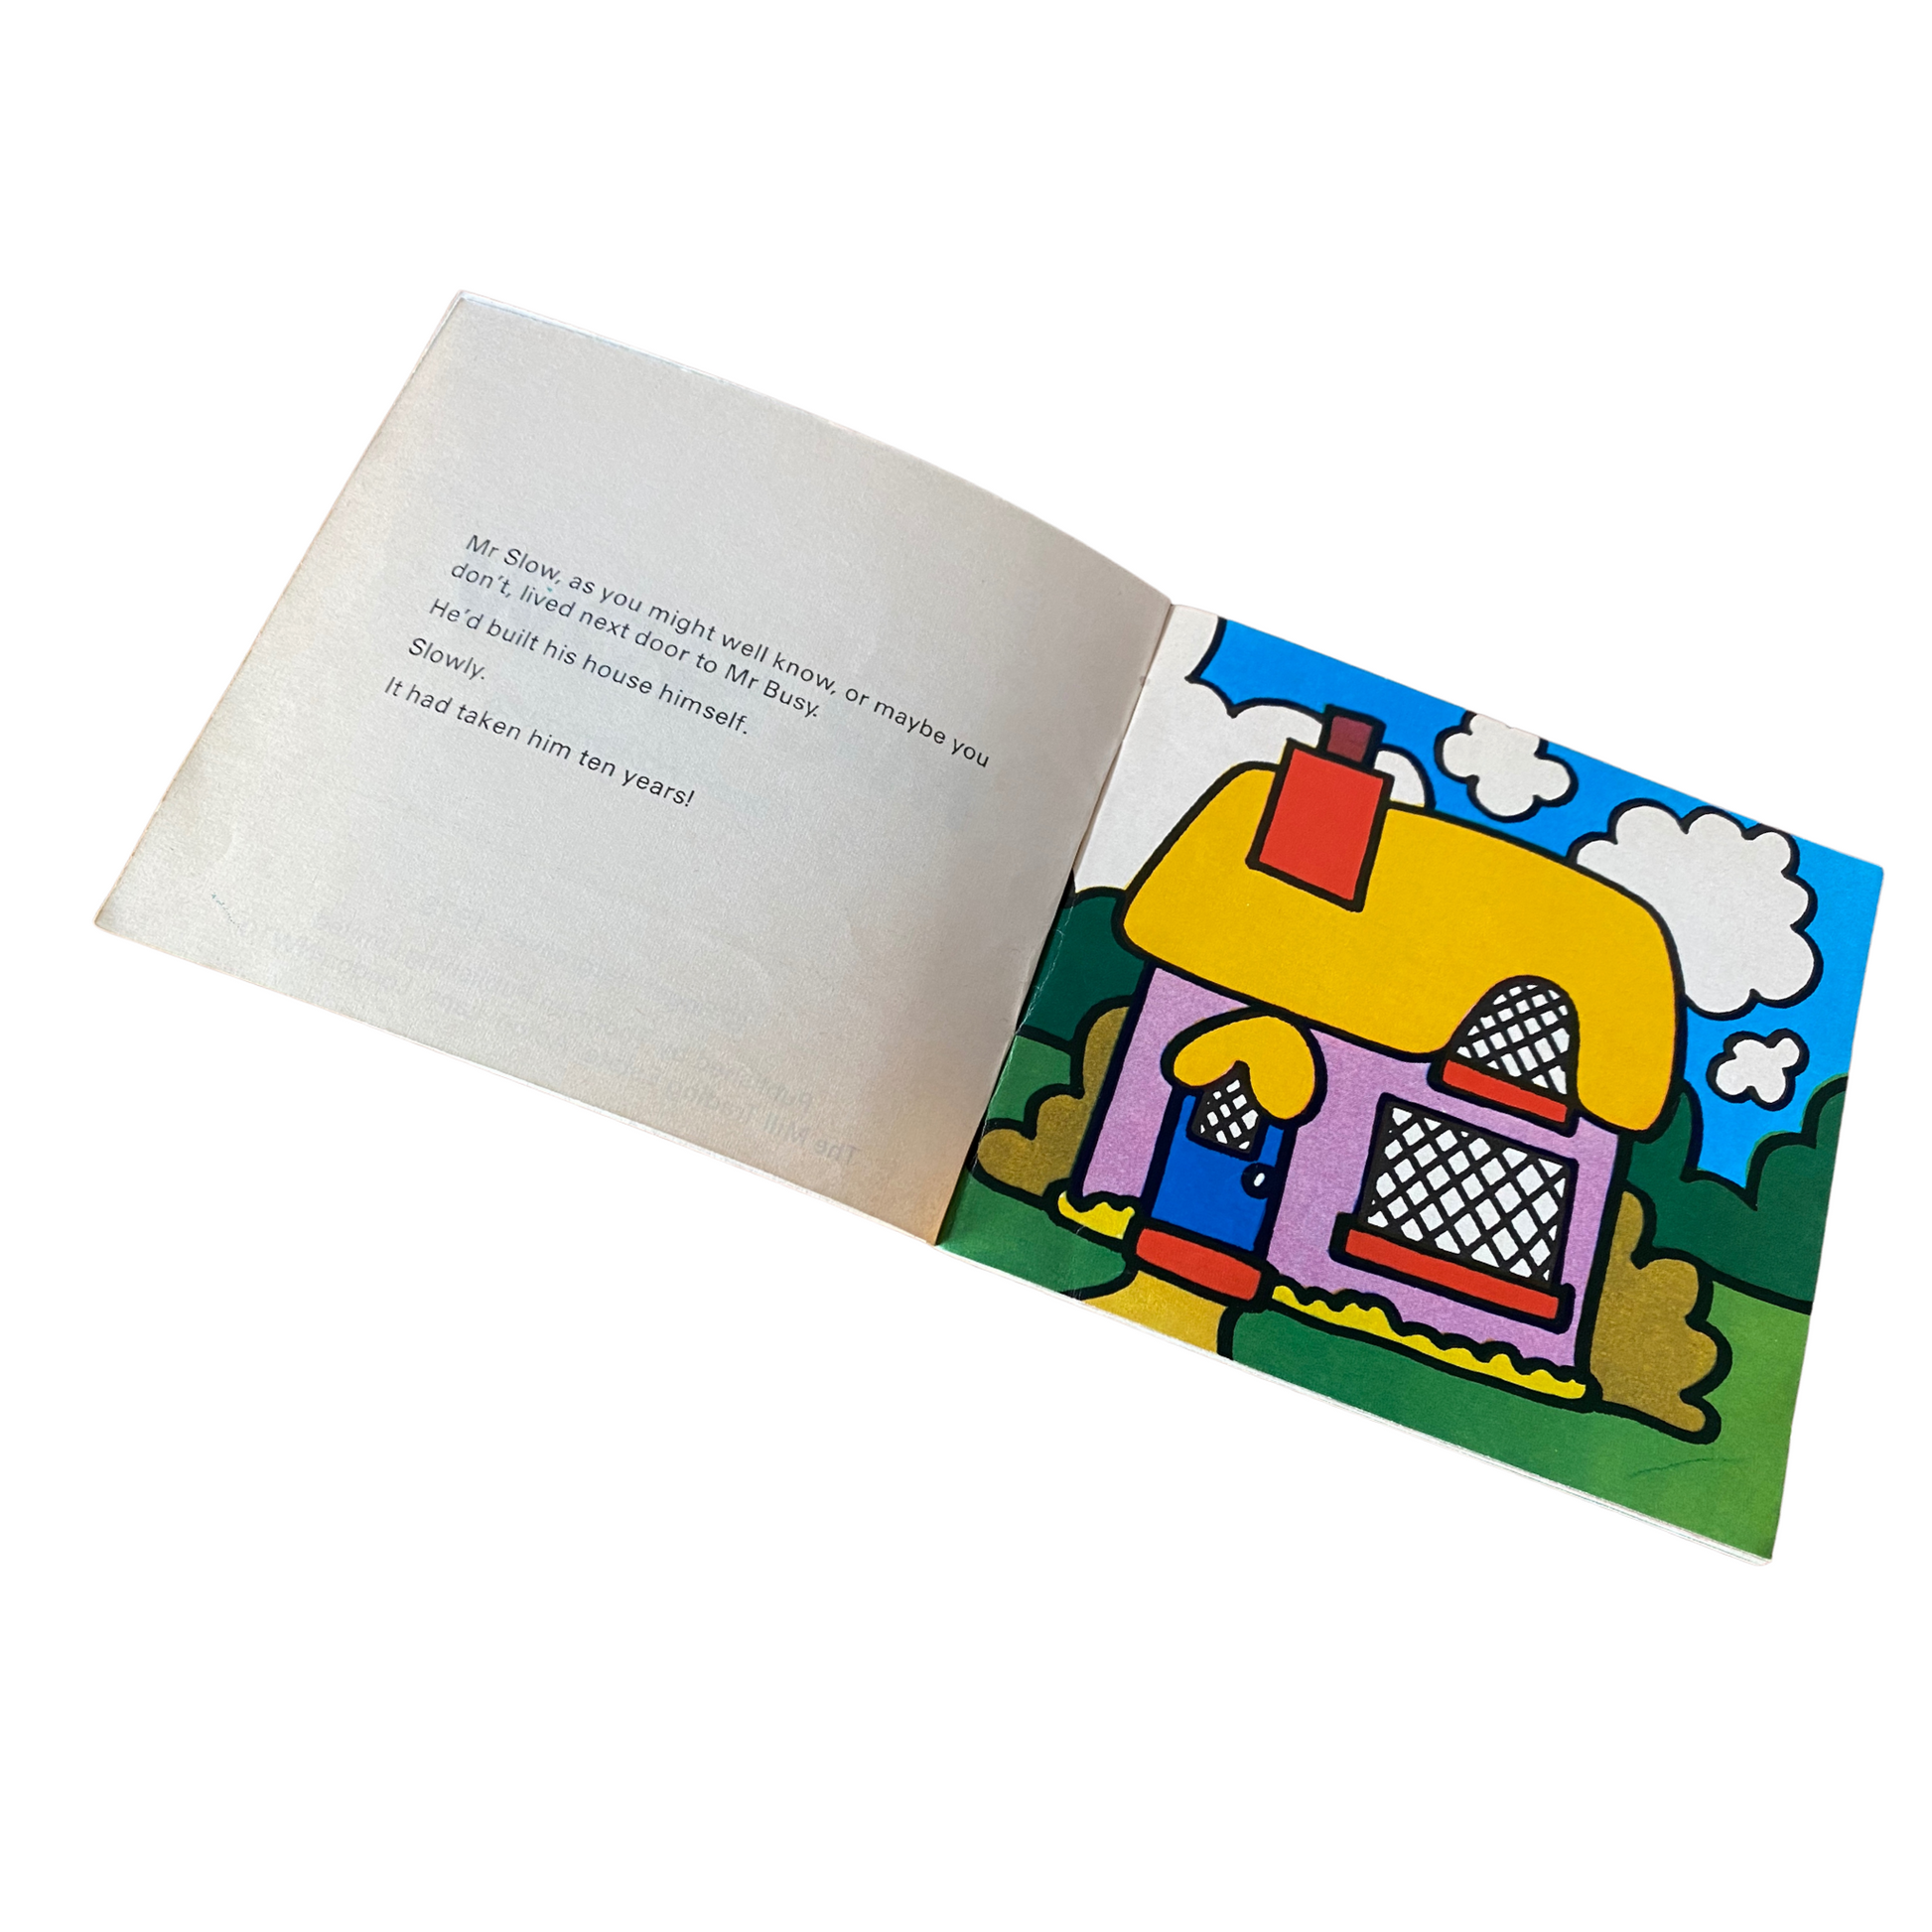 Collectible  Mr Slow book  - Original 1970s Roger Hargreaves Edition